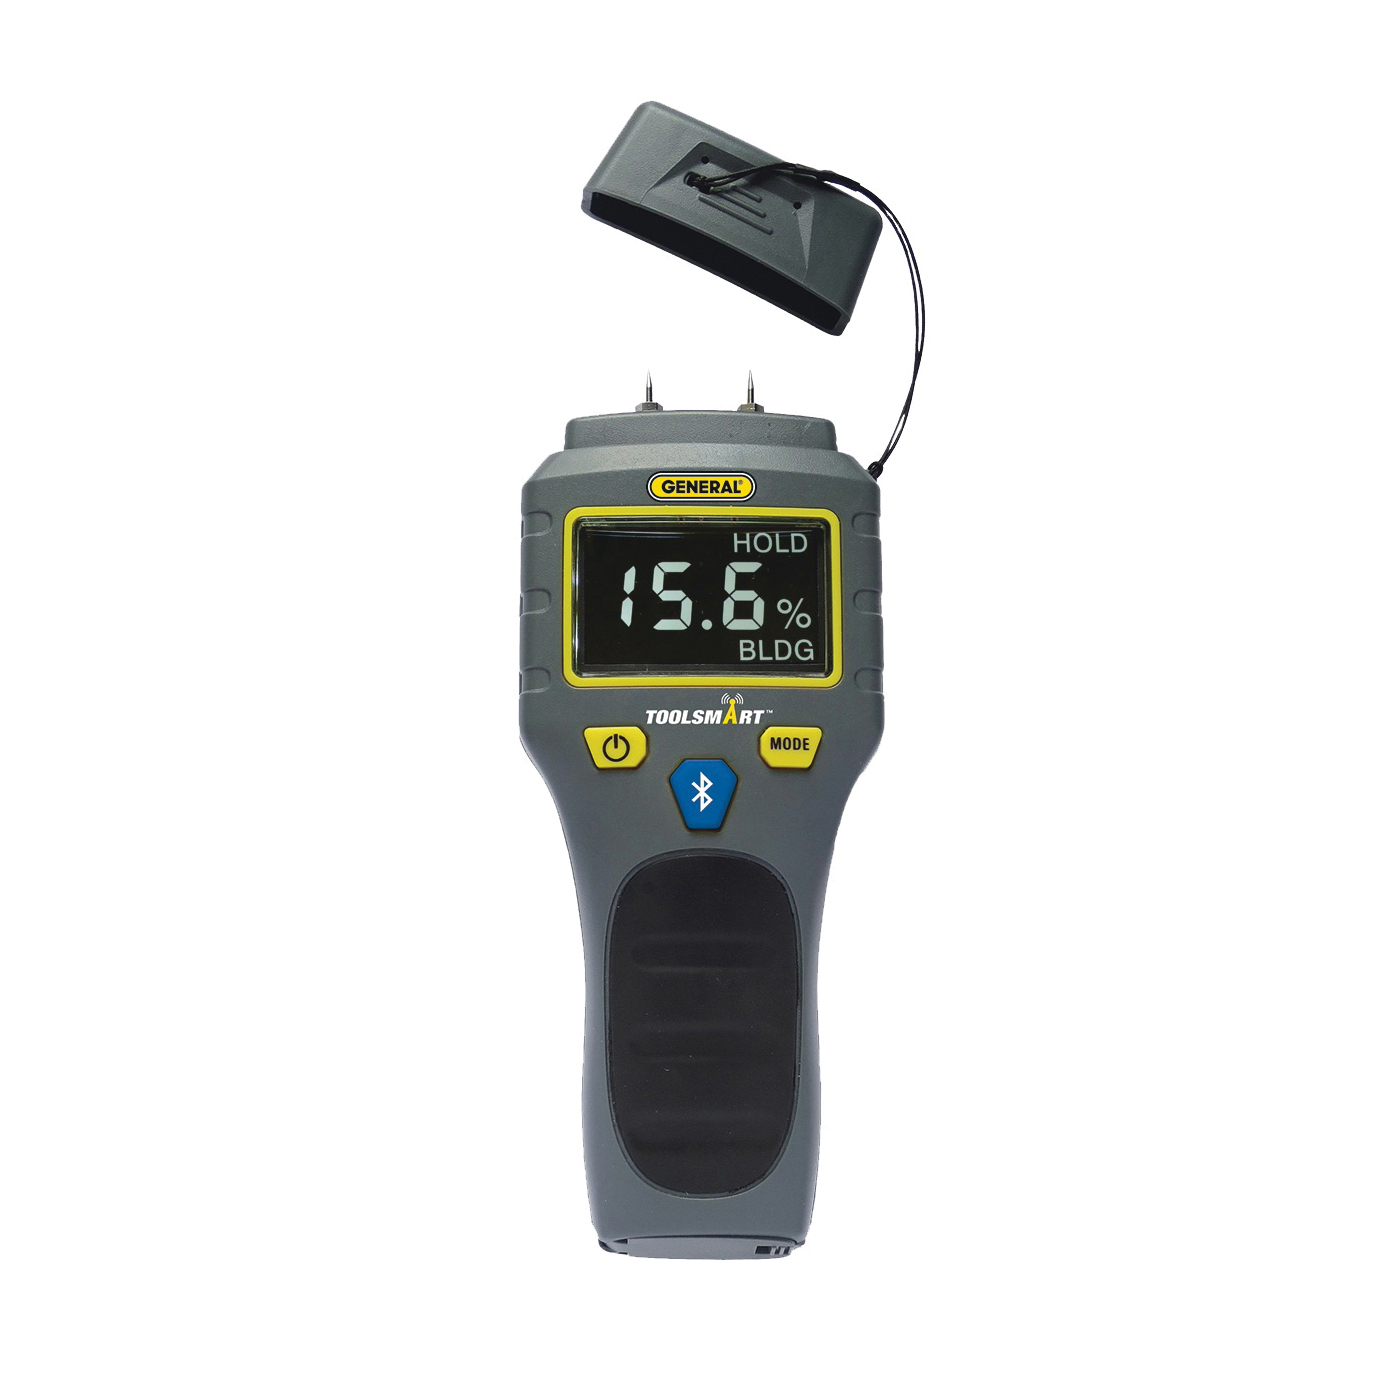 ToolSmart TS06 Moisture Meter, 5 to 50% Wood, 1.5 to 33% Building Materials, 2 % Accuracy, Digital Display